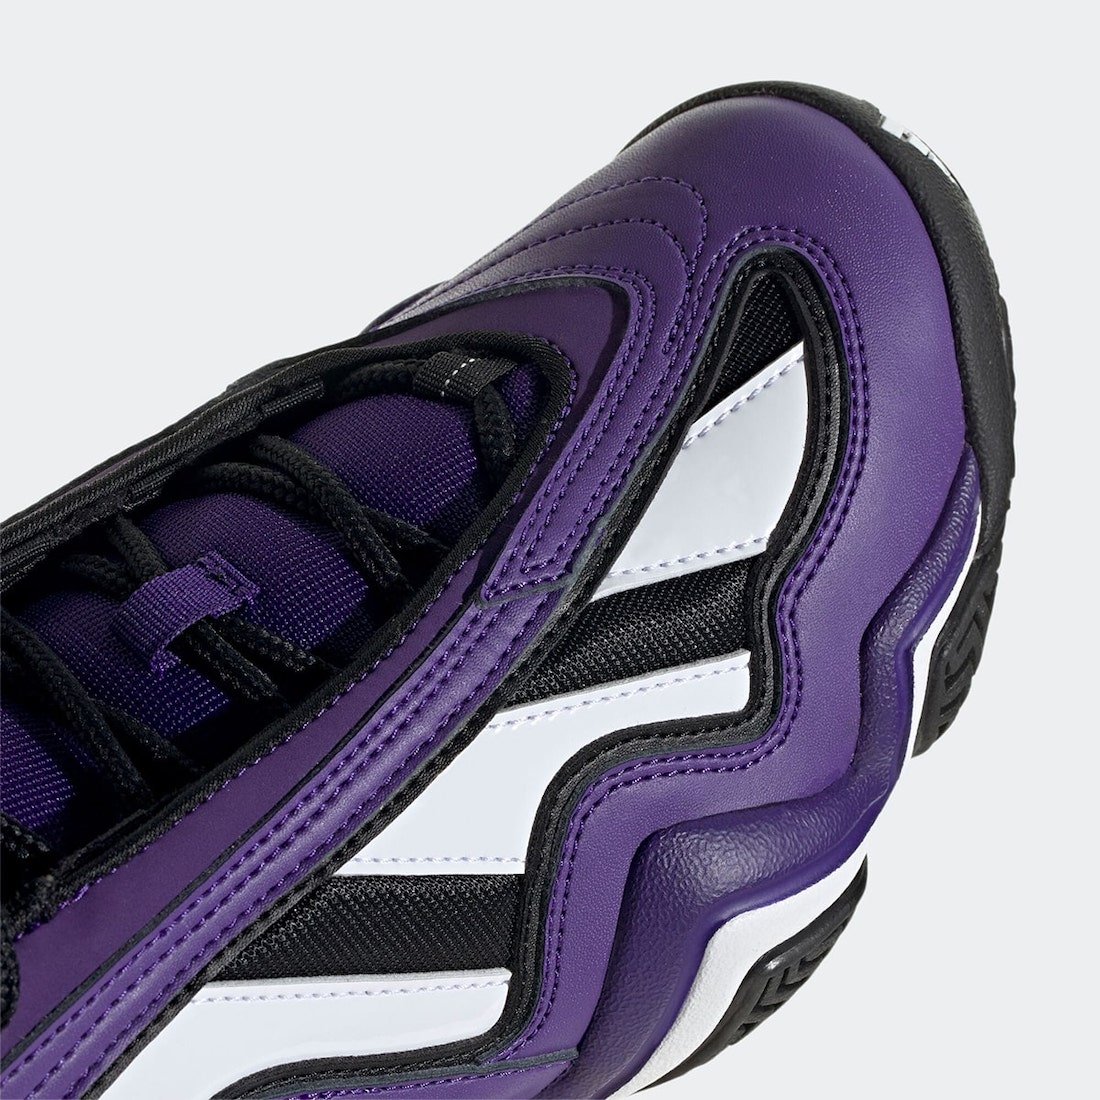 adidas Crazy 97 EQT Dunk Contest GY4520 Release Date Info